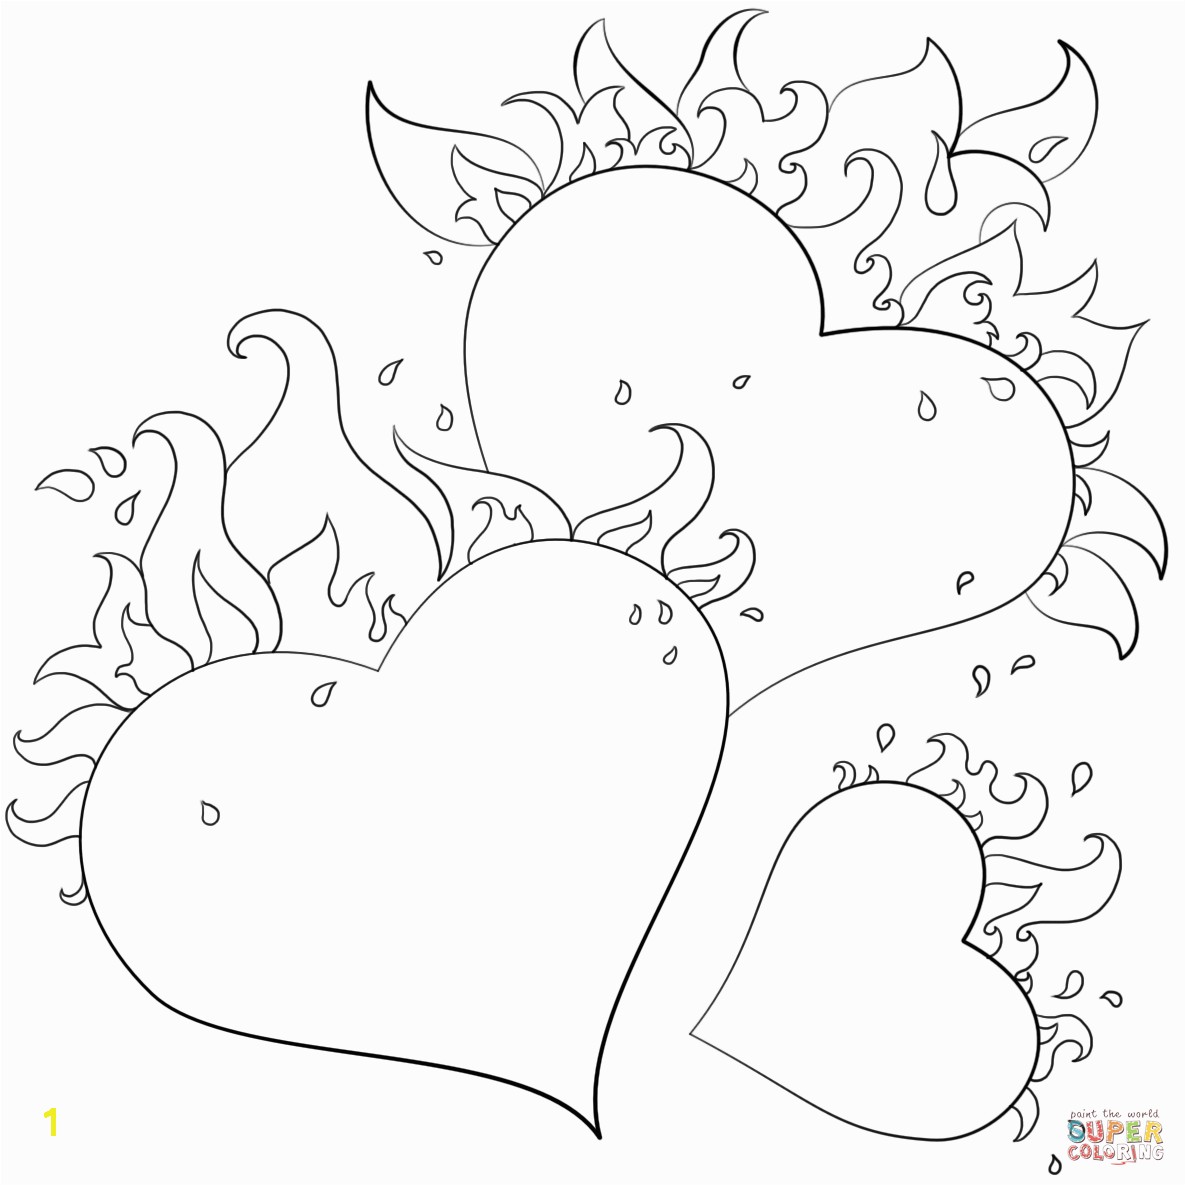 the Hearts with Flames coloring pages to view printable